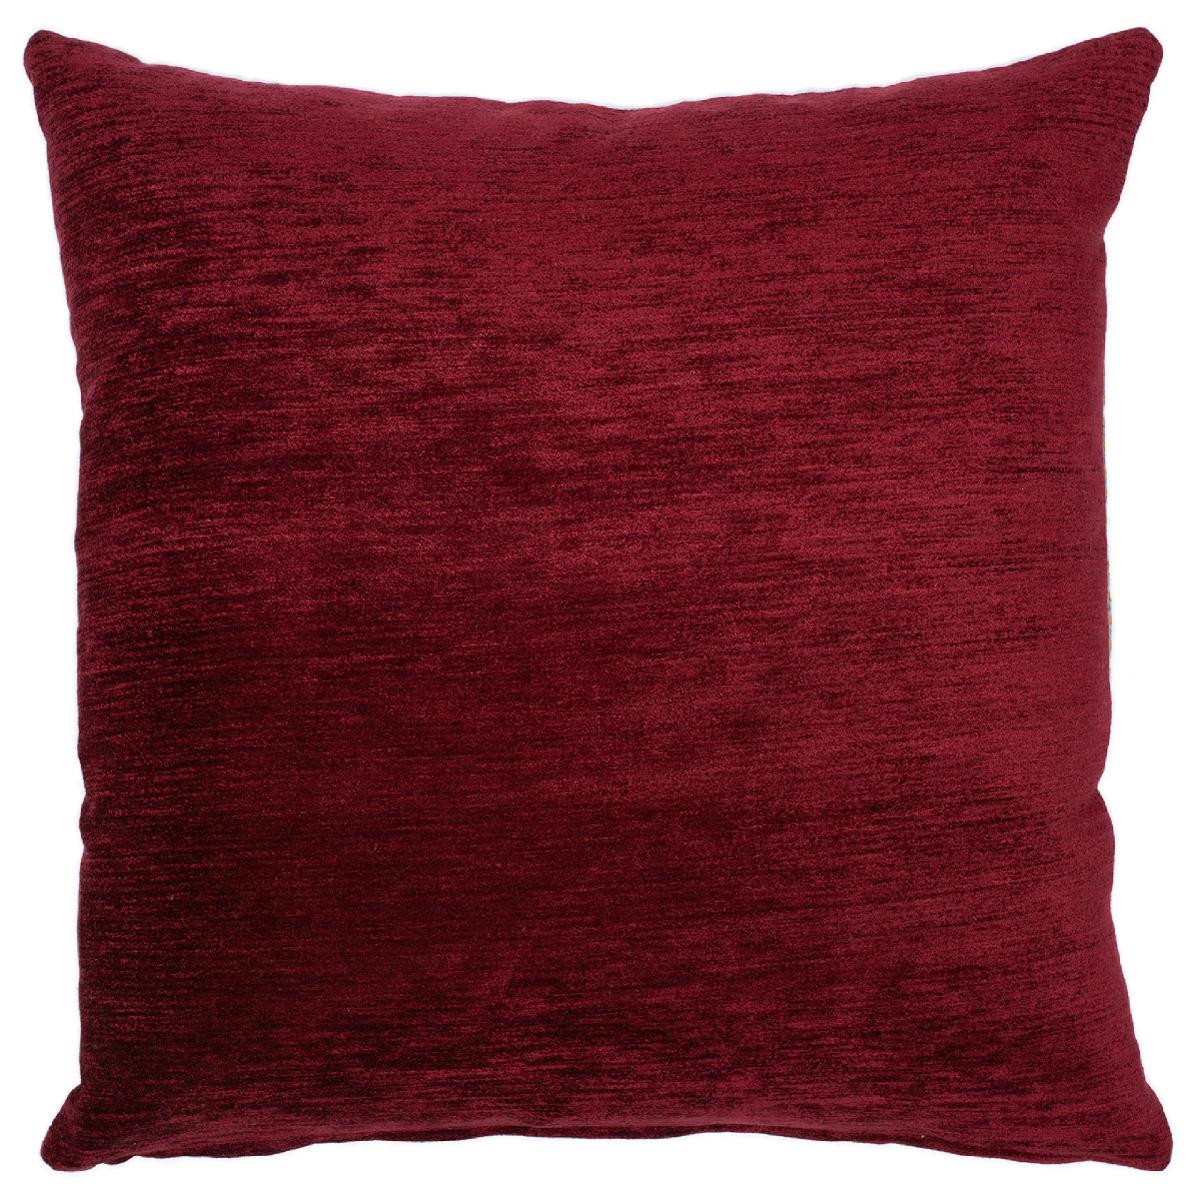 COLOUR: Red with red fringe
FRONT MATERIAL: 76% Viscose, 11% Polyester, 13% Cotton Jacquard woven fabric
BACK MATERIAL: Chenille 
FILLER: Feather
STOCK SIZE: 60cm x 60cm (approx)
ORIGIN: Fabric produced in Turkey, cushions made in the UK

Here at